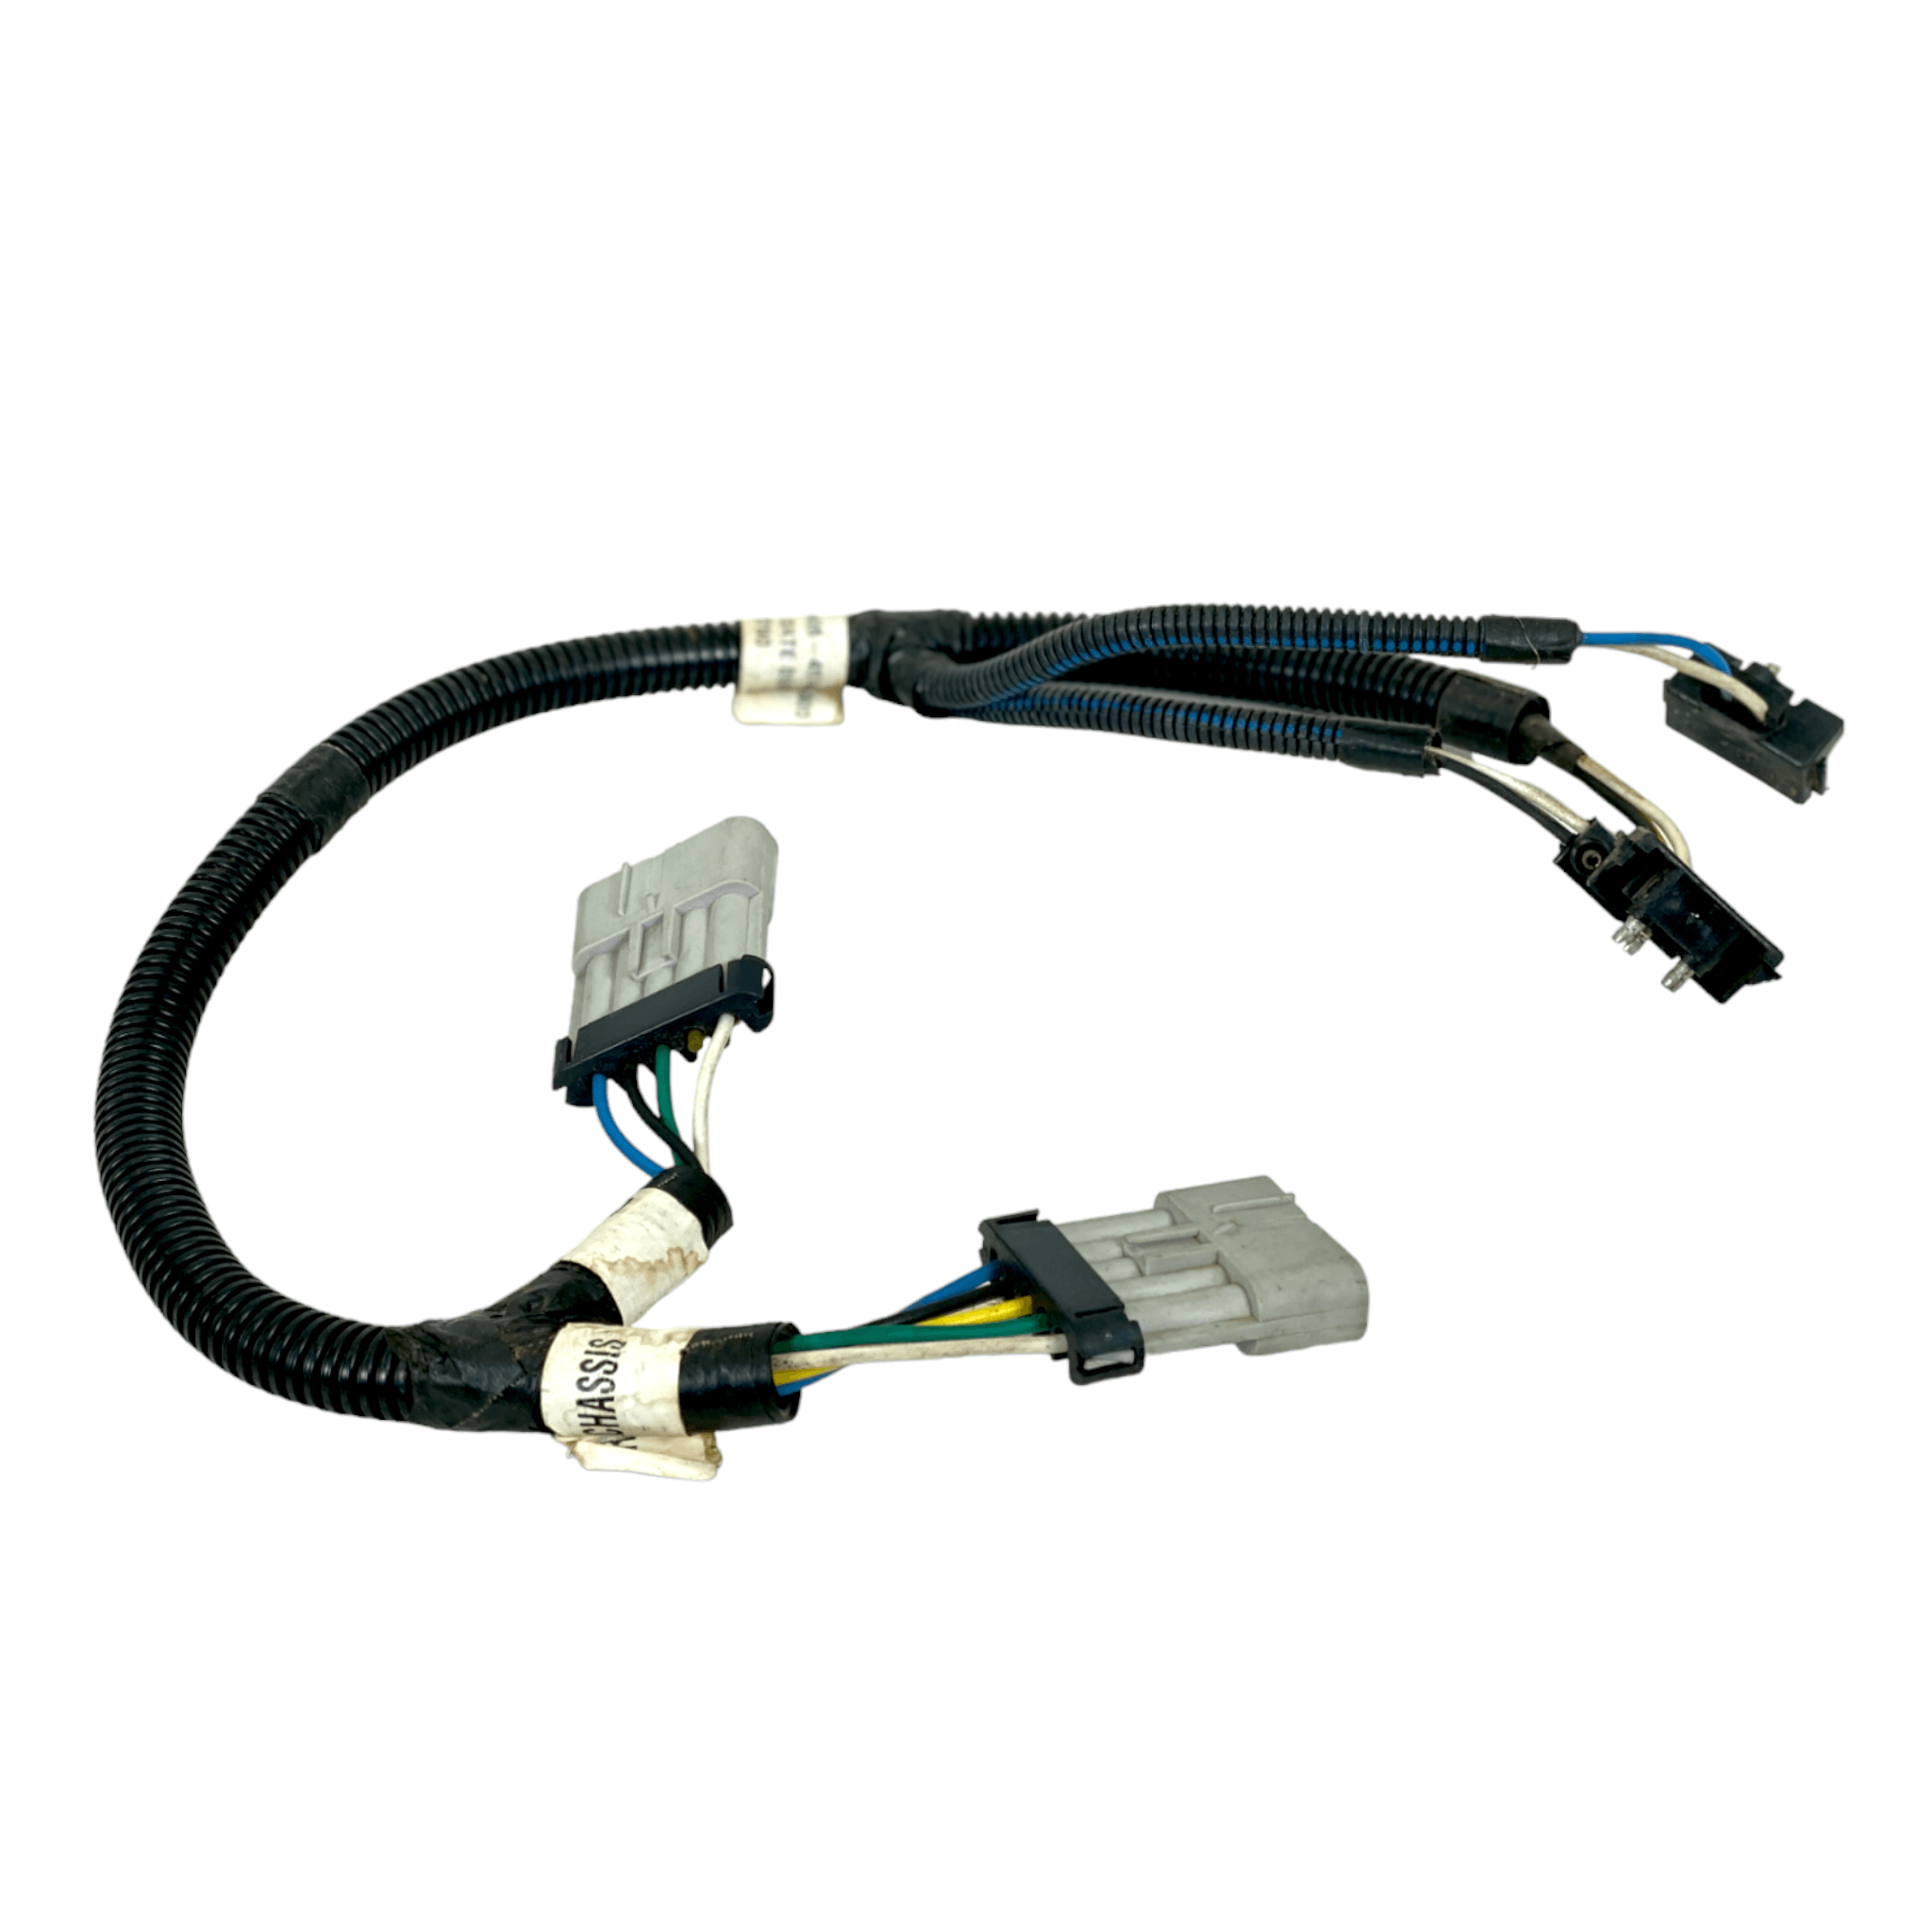 A06-45744-000 Genuine Freightliner® Harness-Tail Lt S40 Raila3640 Ph1153 1271953 - ADVANCED TRUCK PARTS